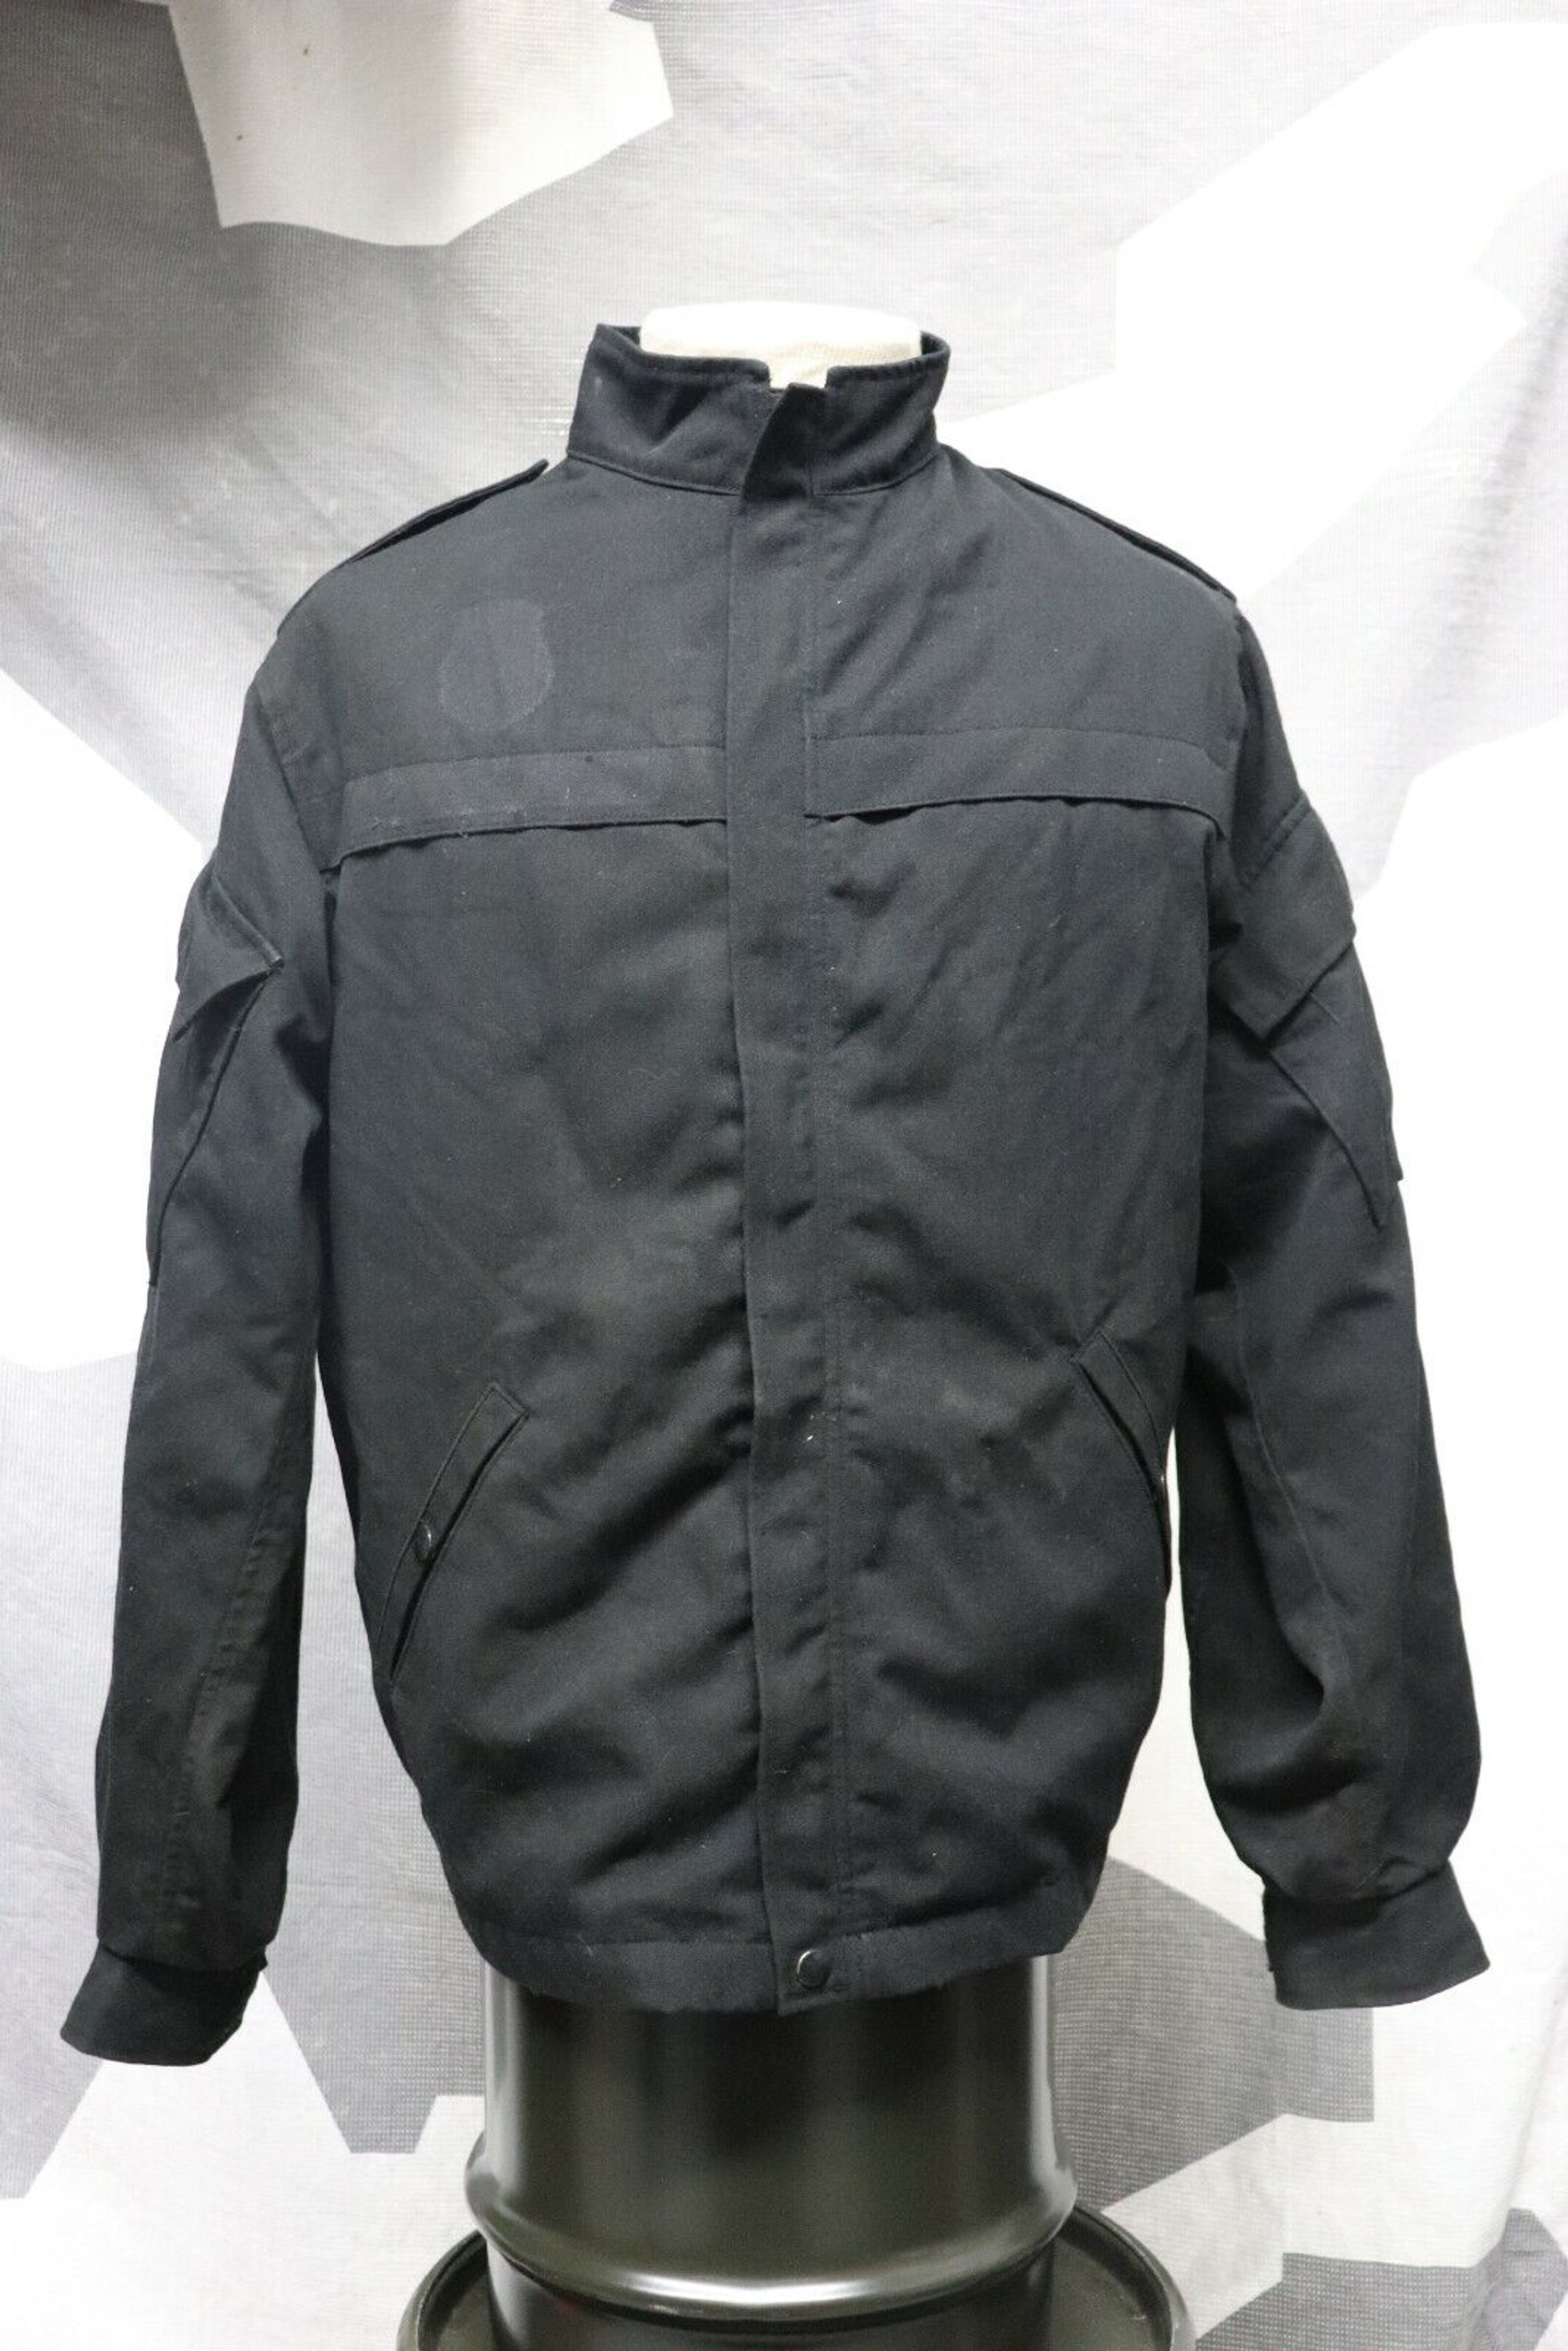 Canadian Armed Forces Nomex Naval Combat Jacket